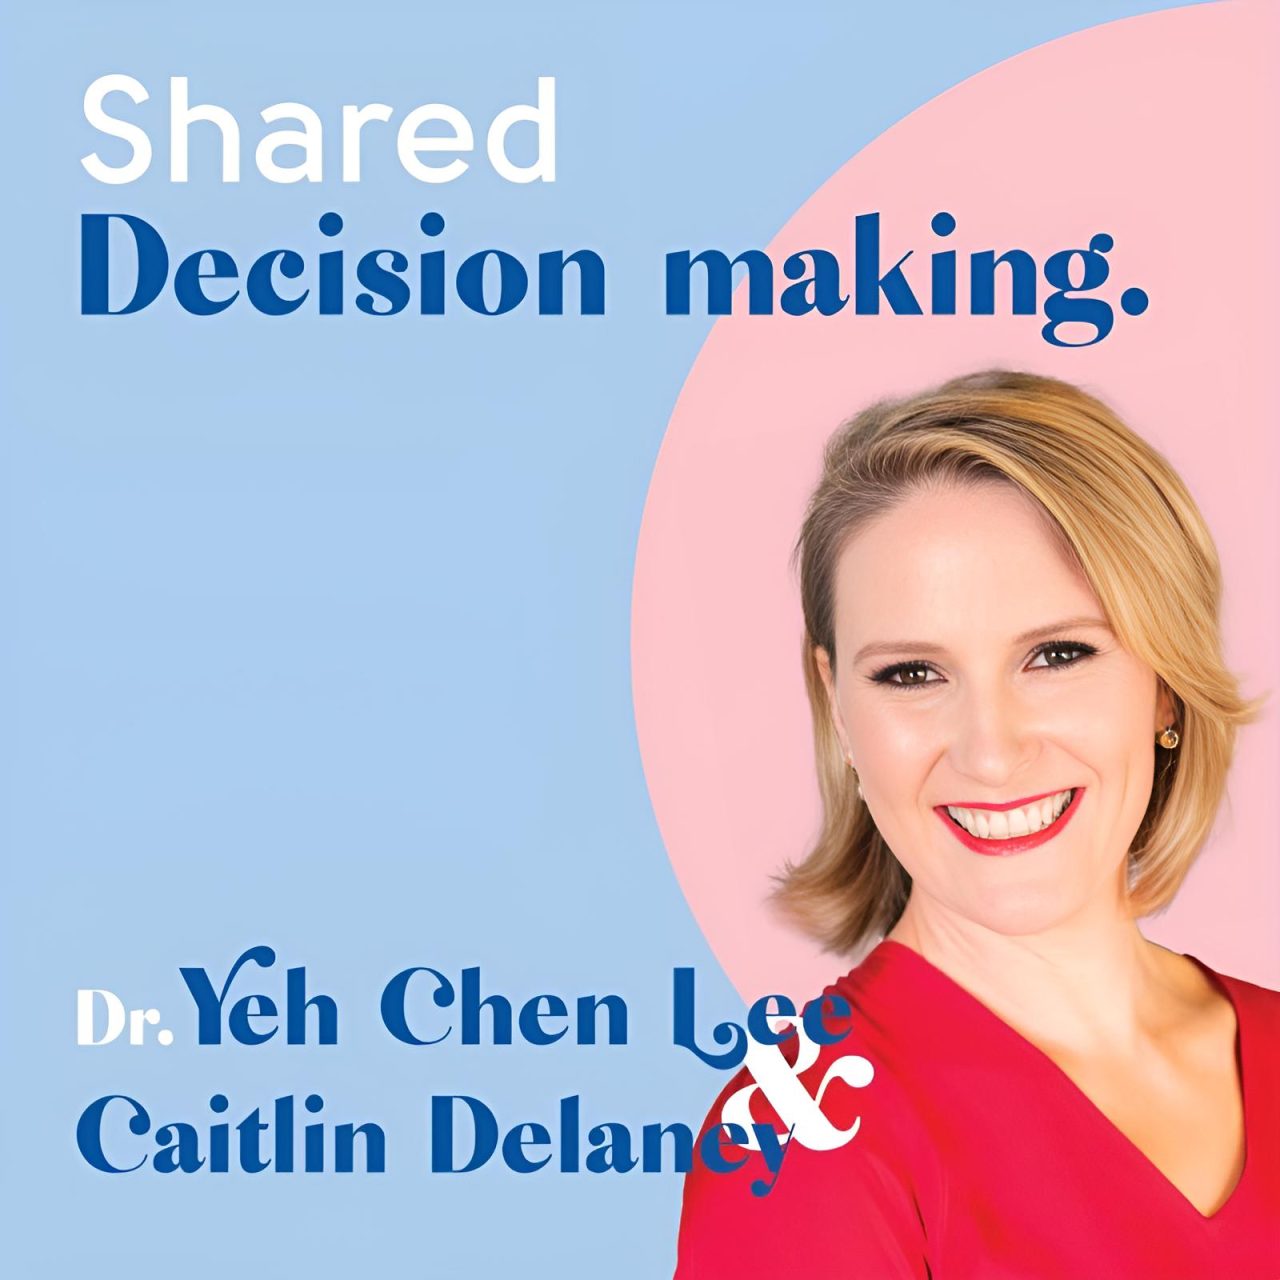 Caitlin Delaney: Being a cancer patient, I’ve learned that shared decision making is key to taking charge of your diagnosis and treatment journey